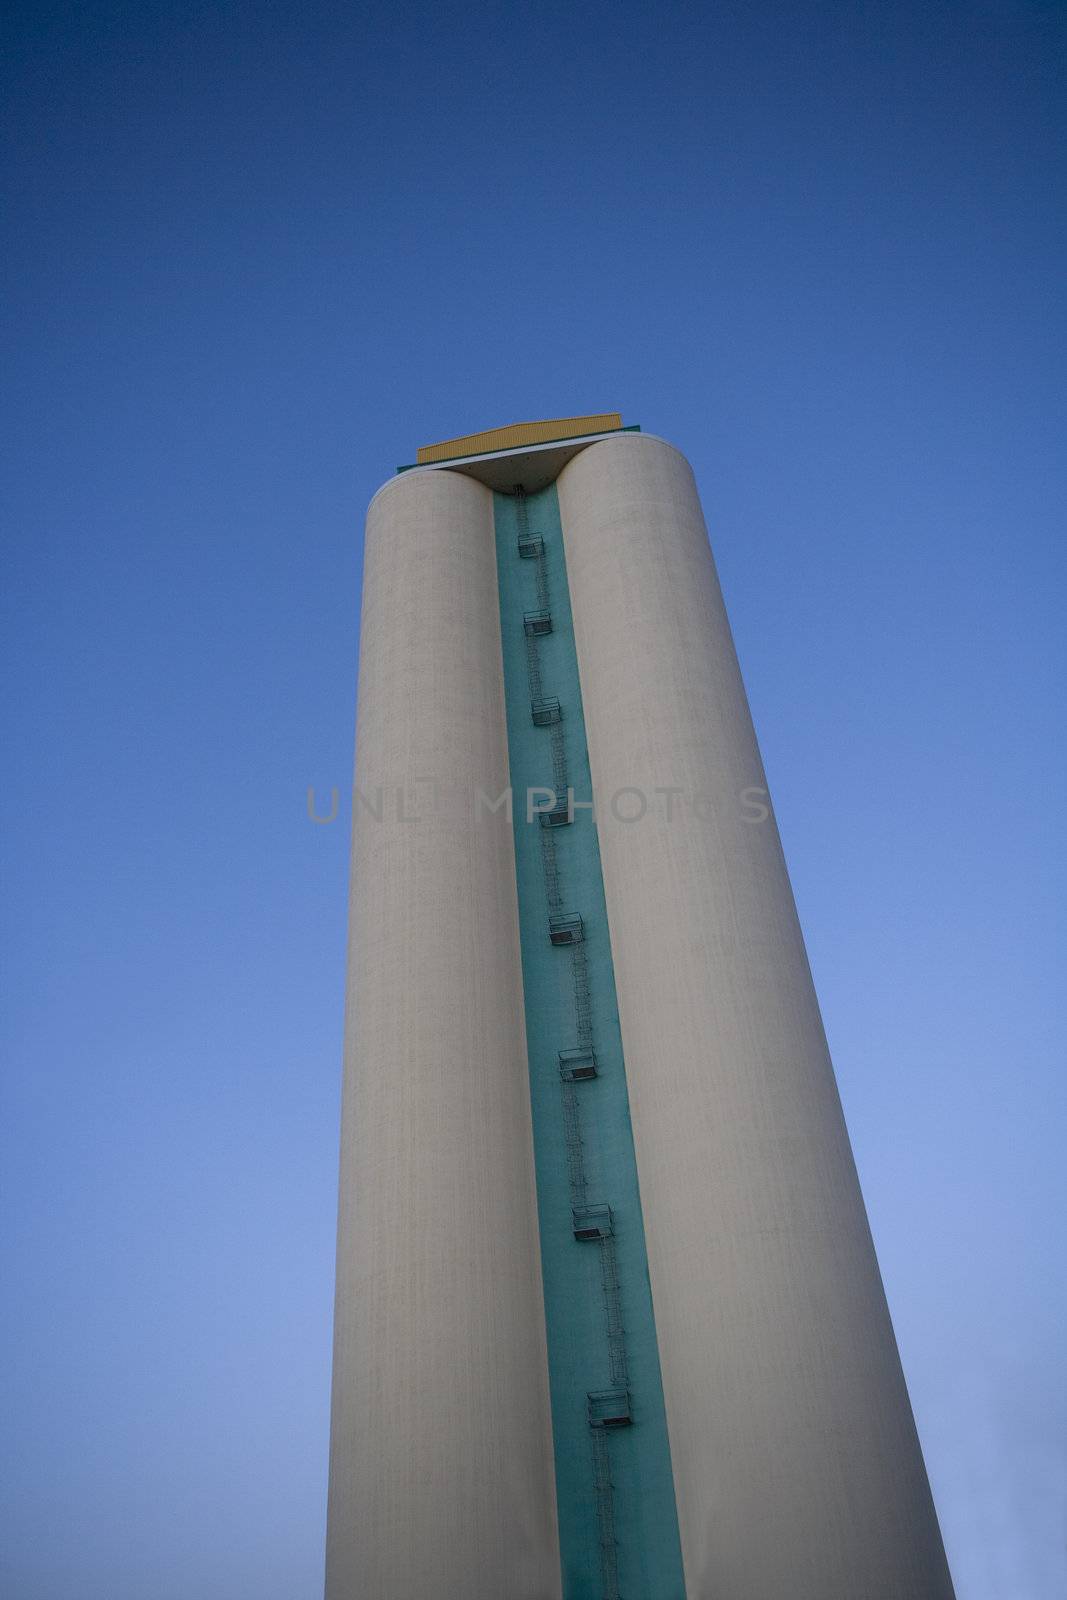 Silo towards blue sky from low angle view